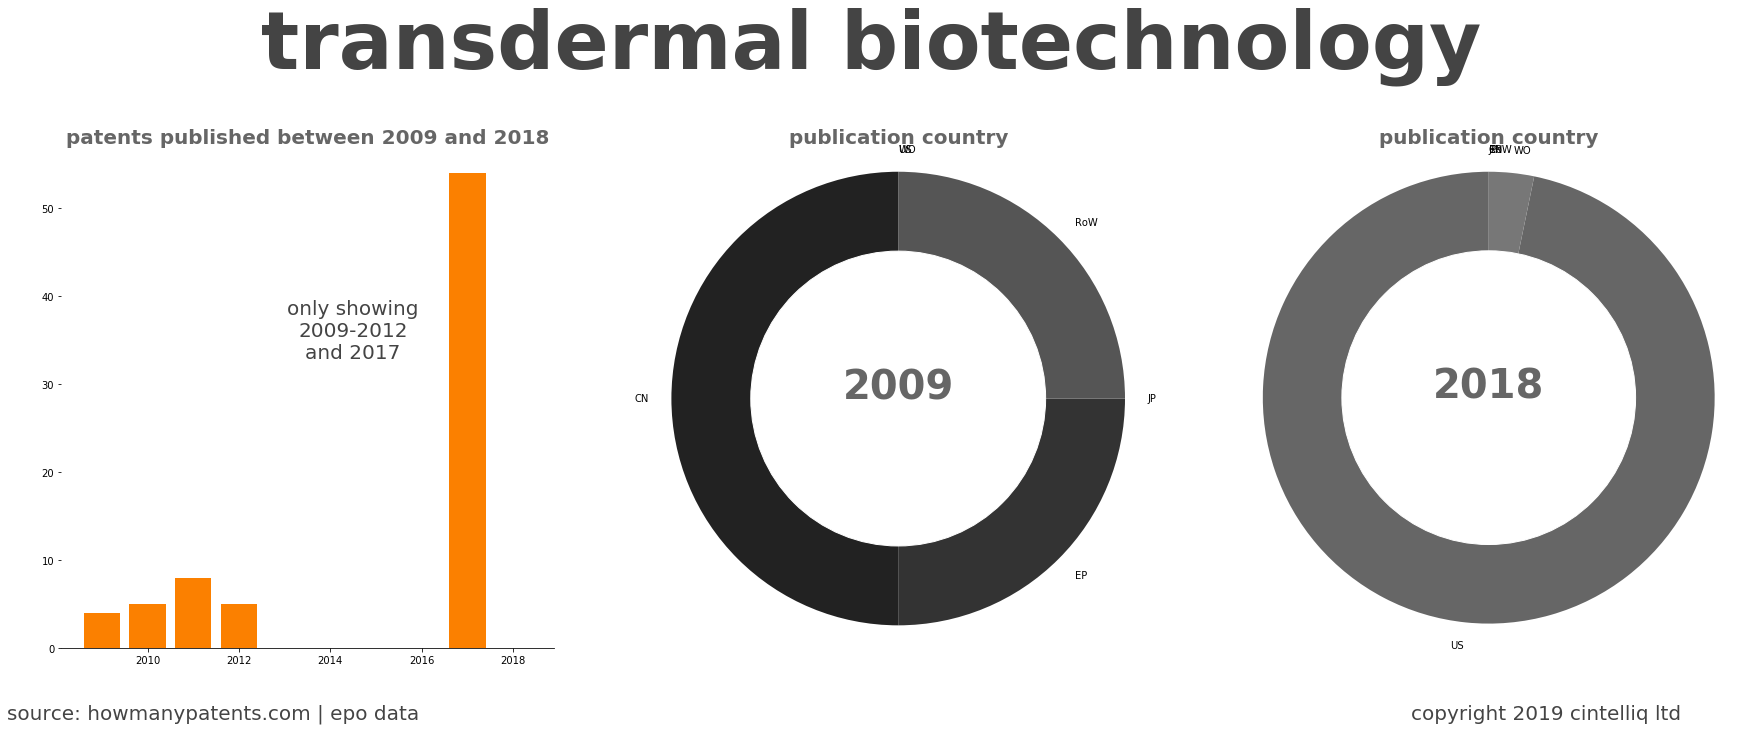 summary of patents for Transdermal Biotechnology